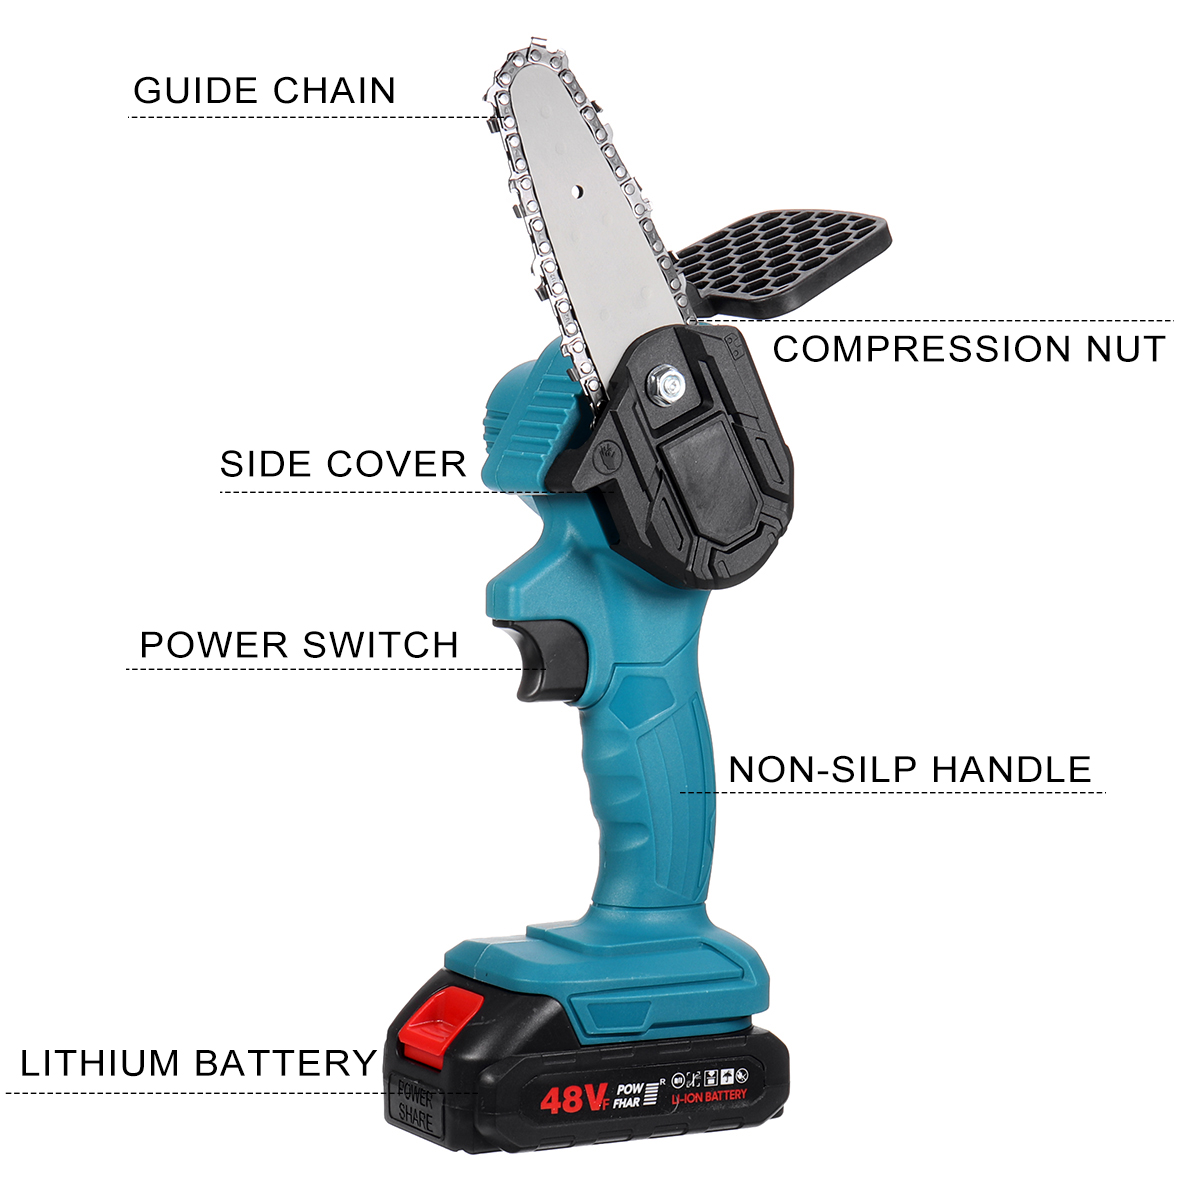 4inch-800W-48VF-Electric-Chain-Saw-Portable-Handheld-Wood-Cutter-Woodworking-Cutting-Tool-W-None1pc2-1827616-4